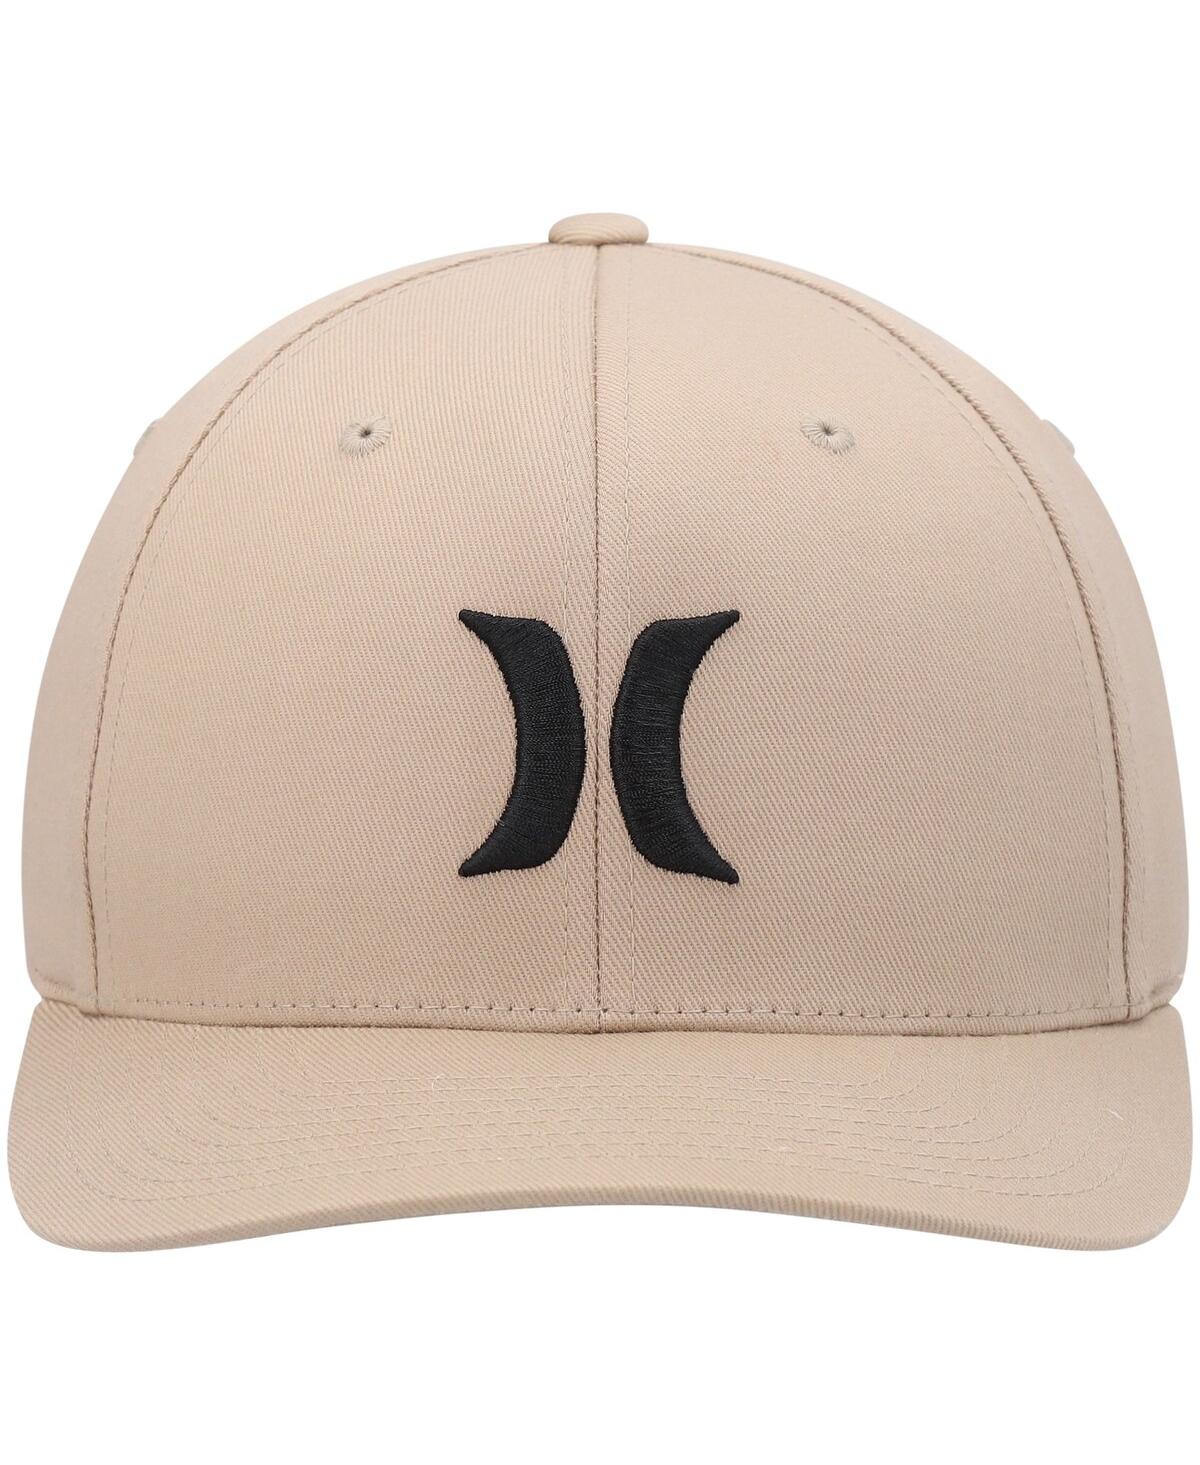 Shop Hurley Men's  Khaki One And Only Tri-blend Flex Fit Hat